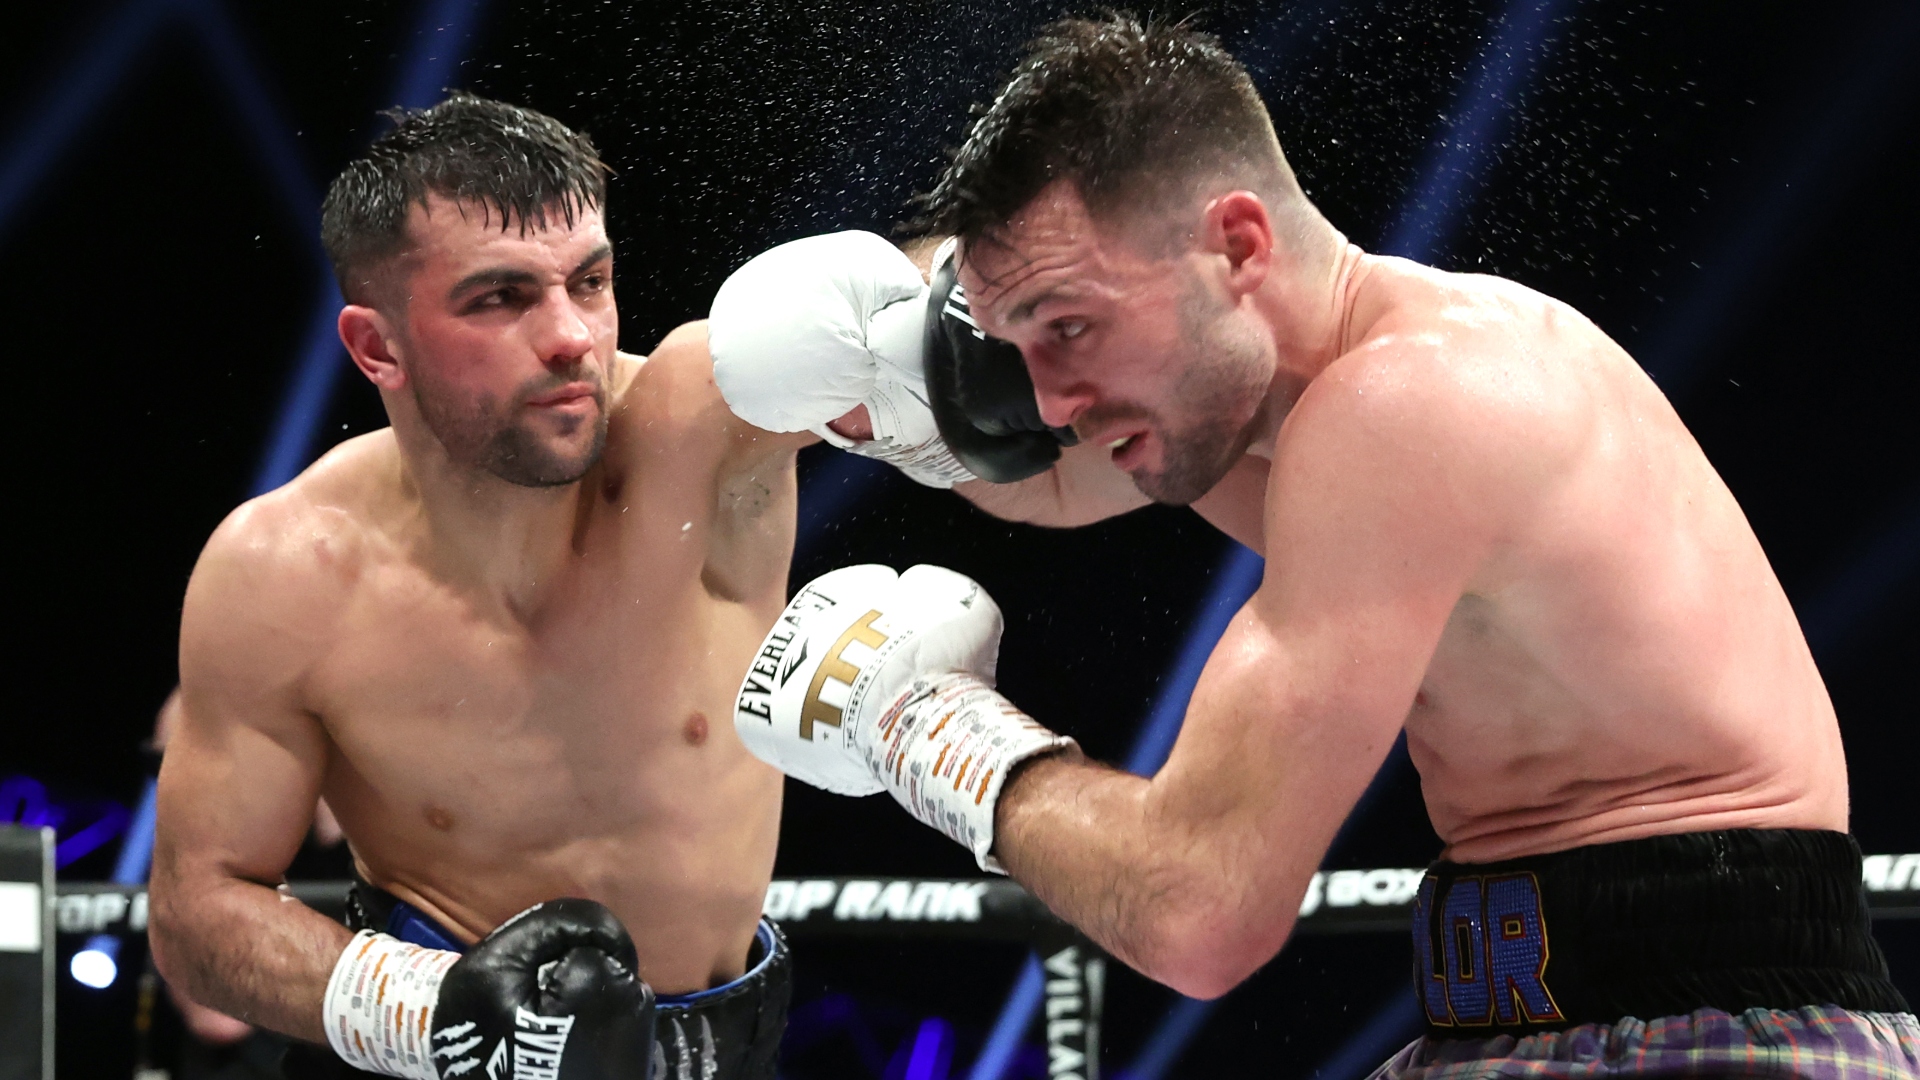 How to watch Josh Taylor vs. Jack Catterall 2